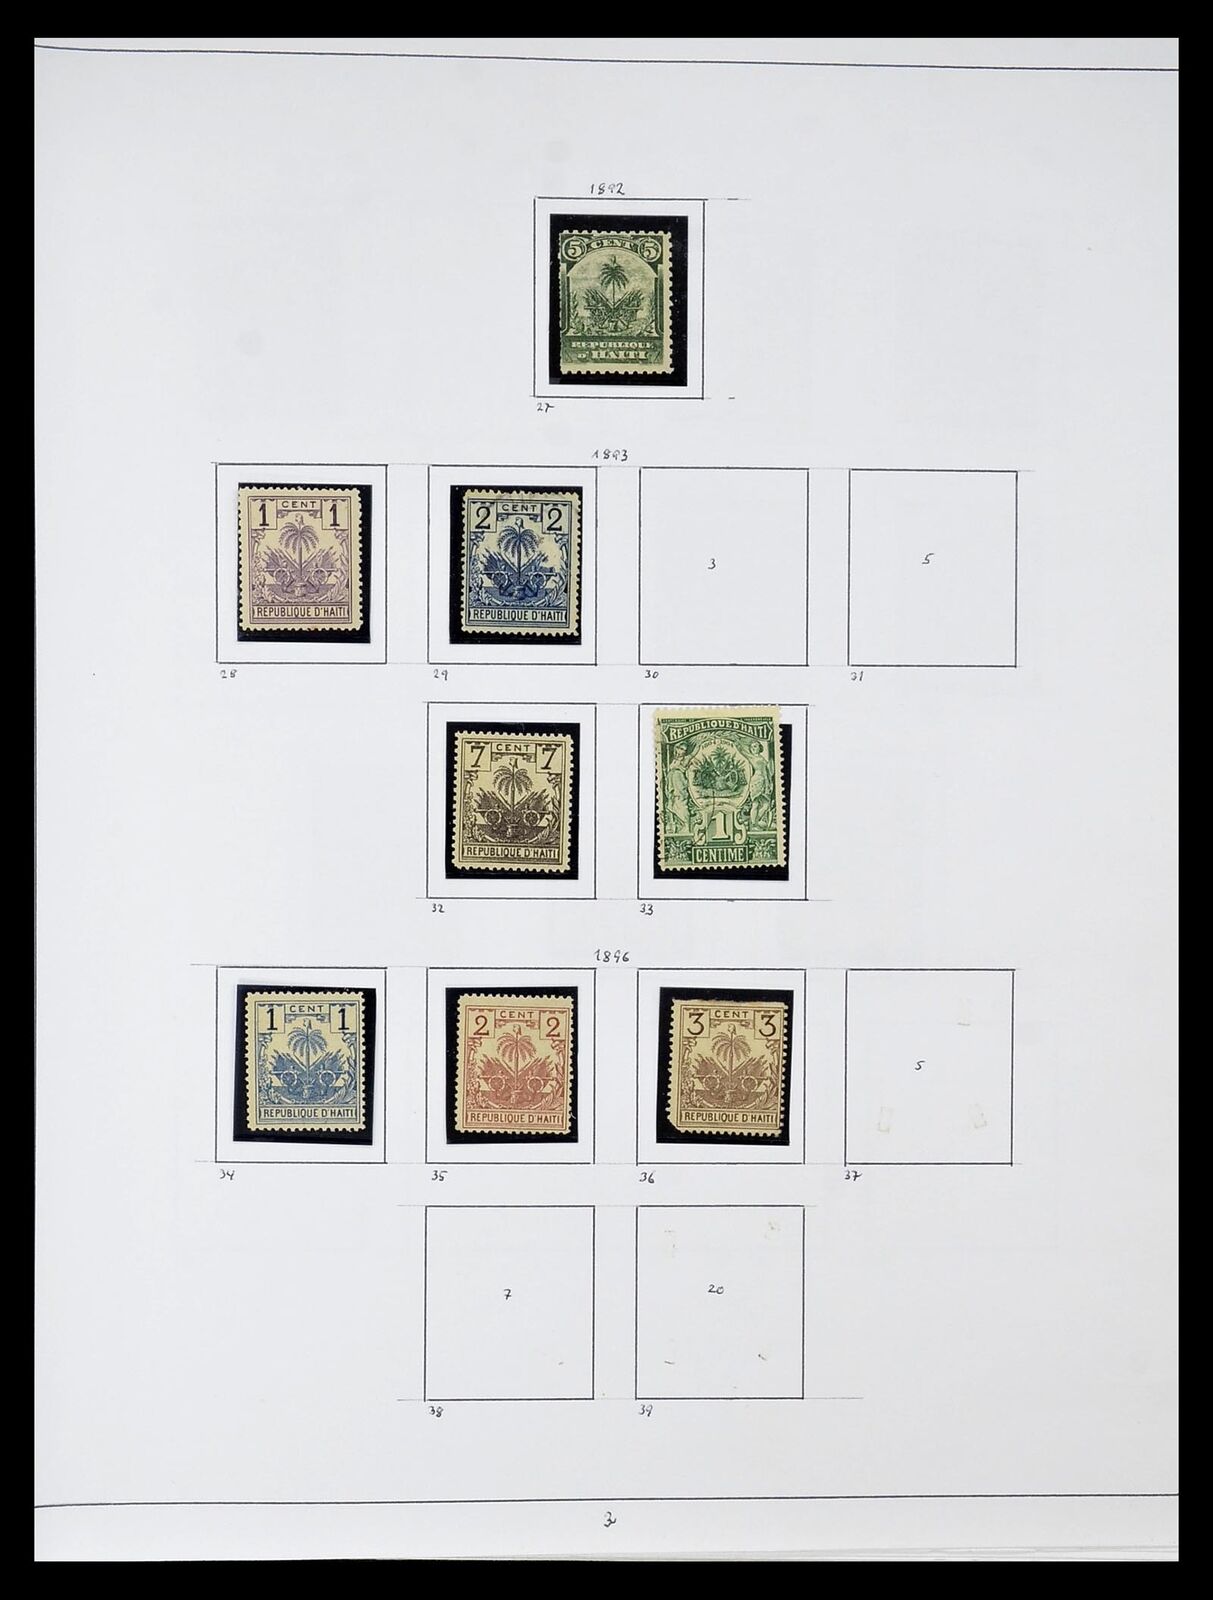 Lot 34787 Stamp collection Haiti 1892-1973.